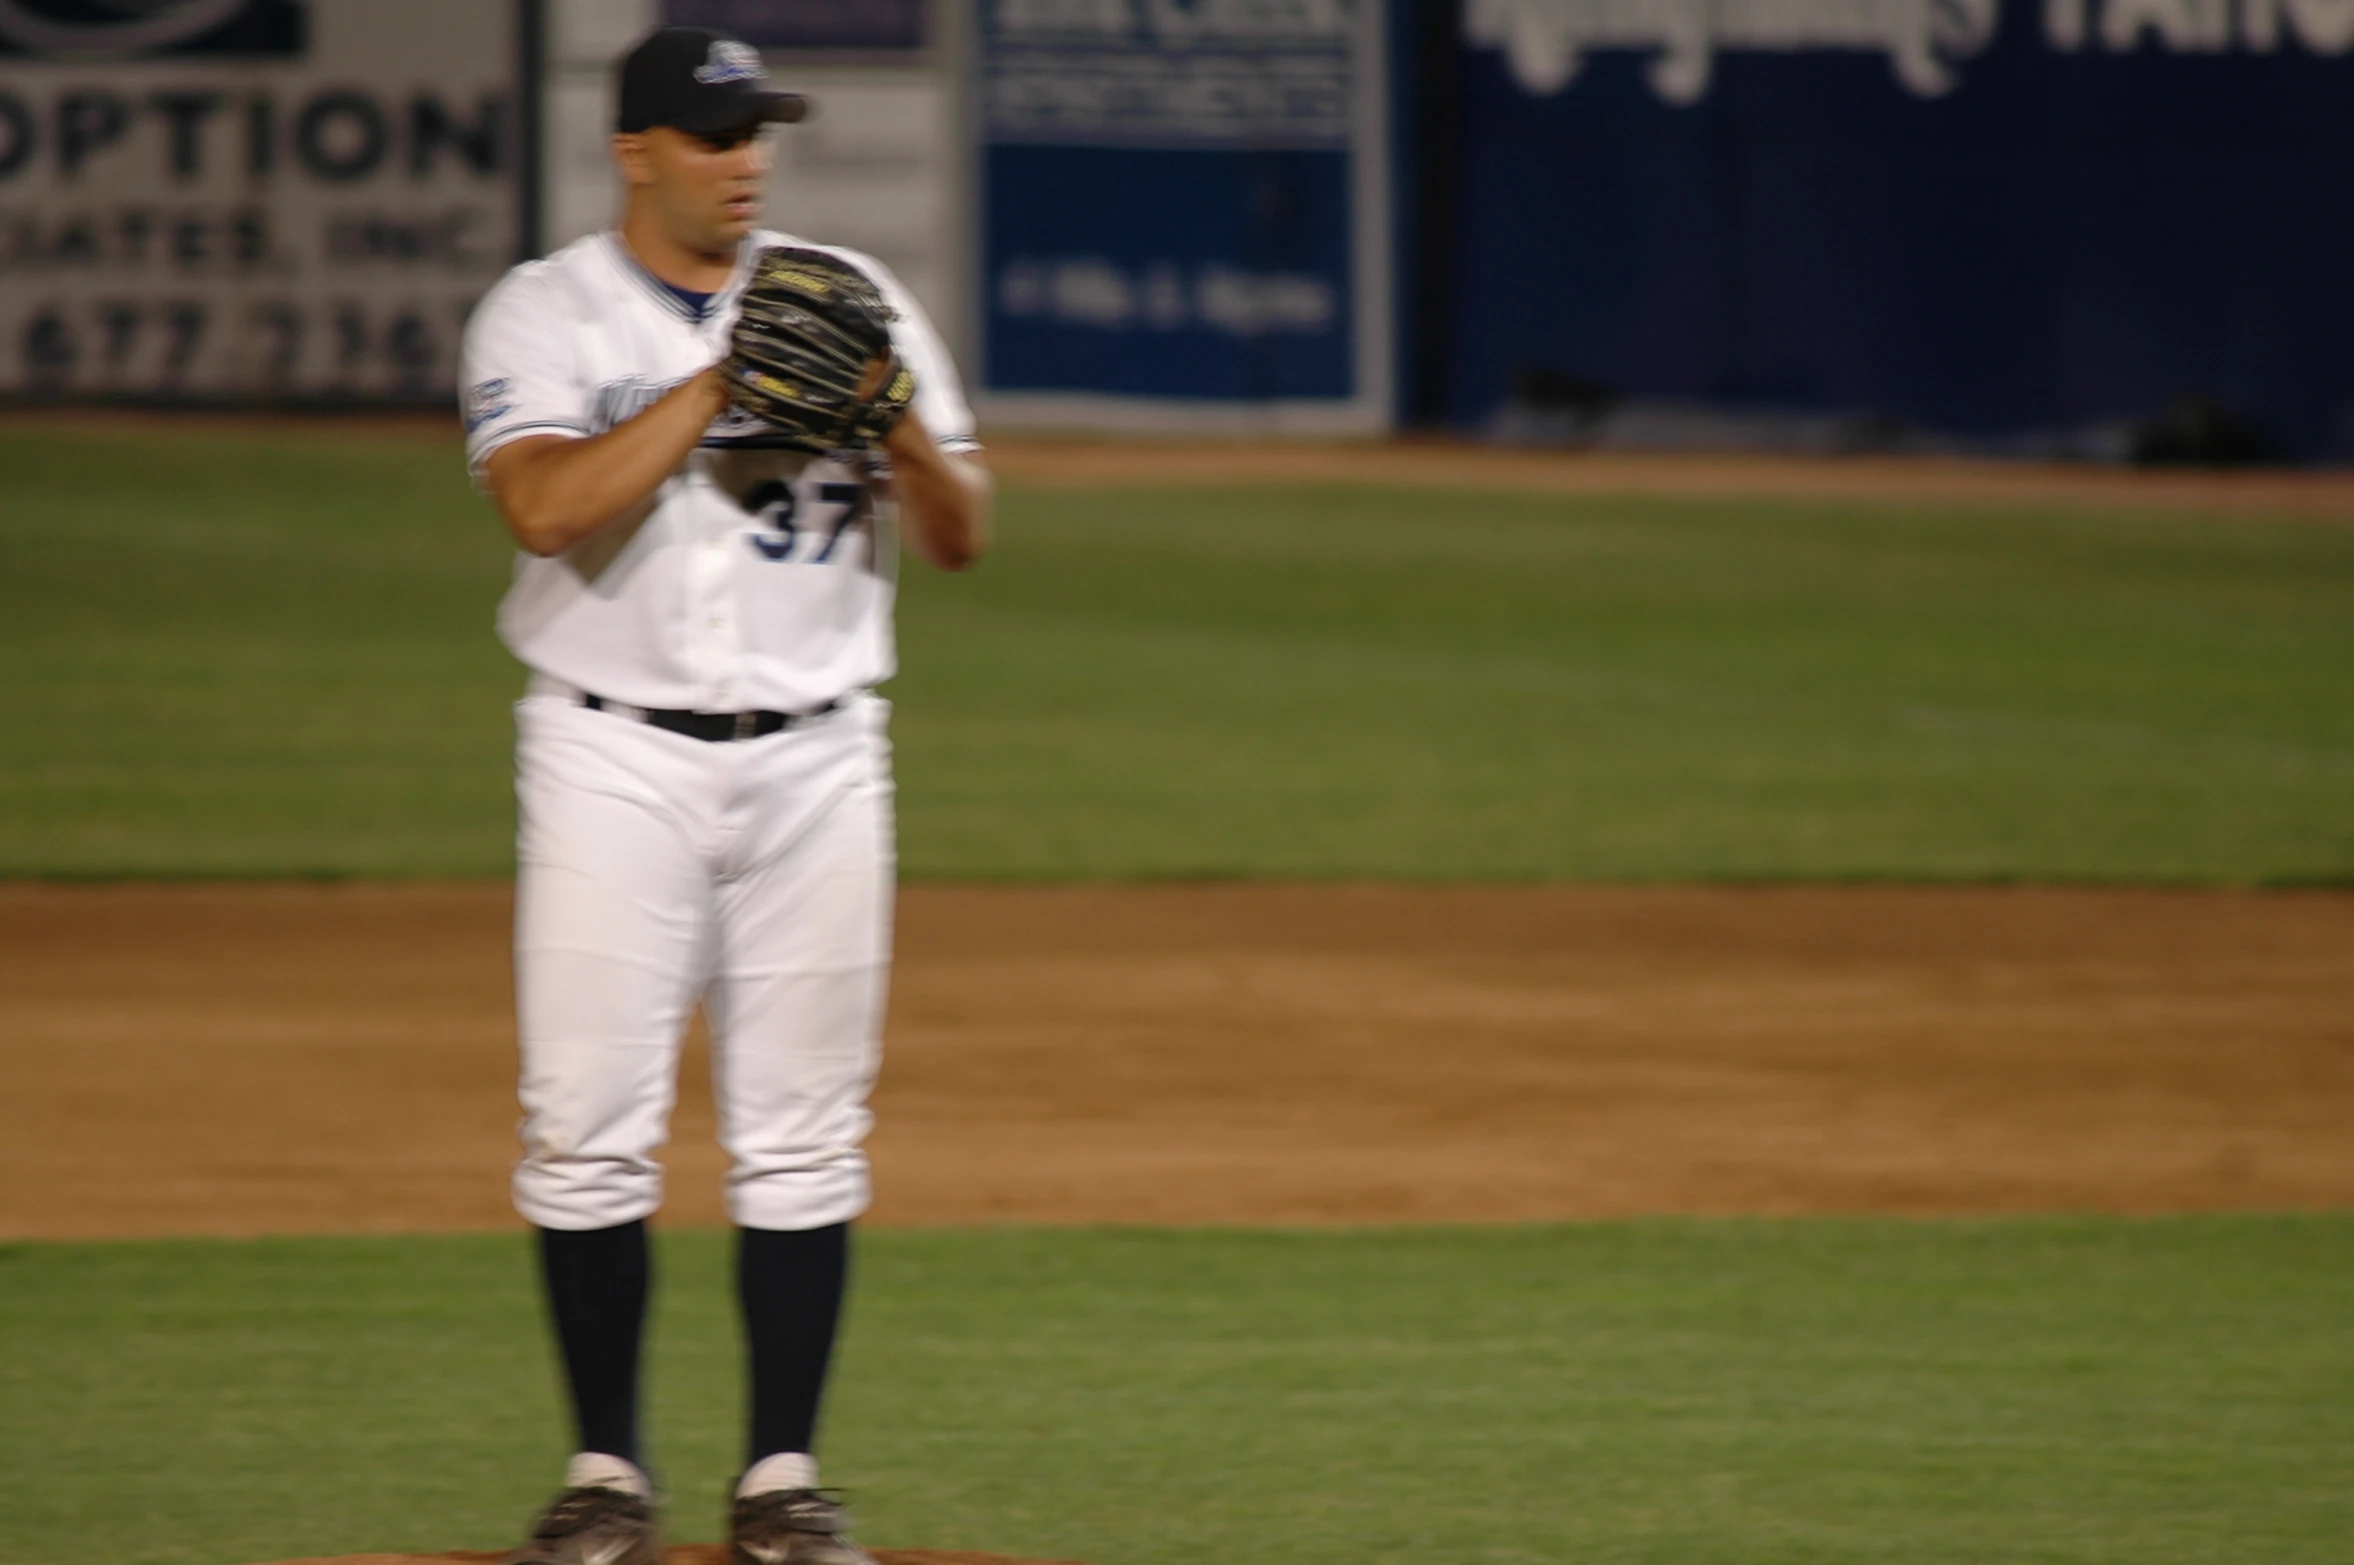 a baseball player is on the field with his glove